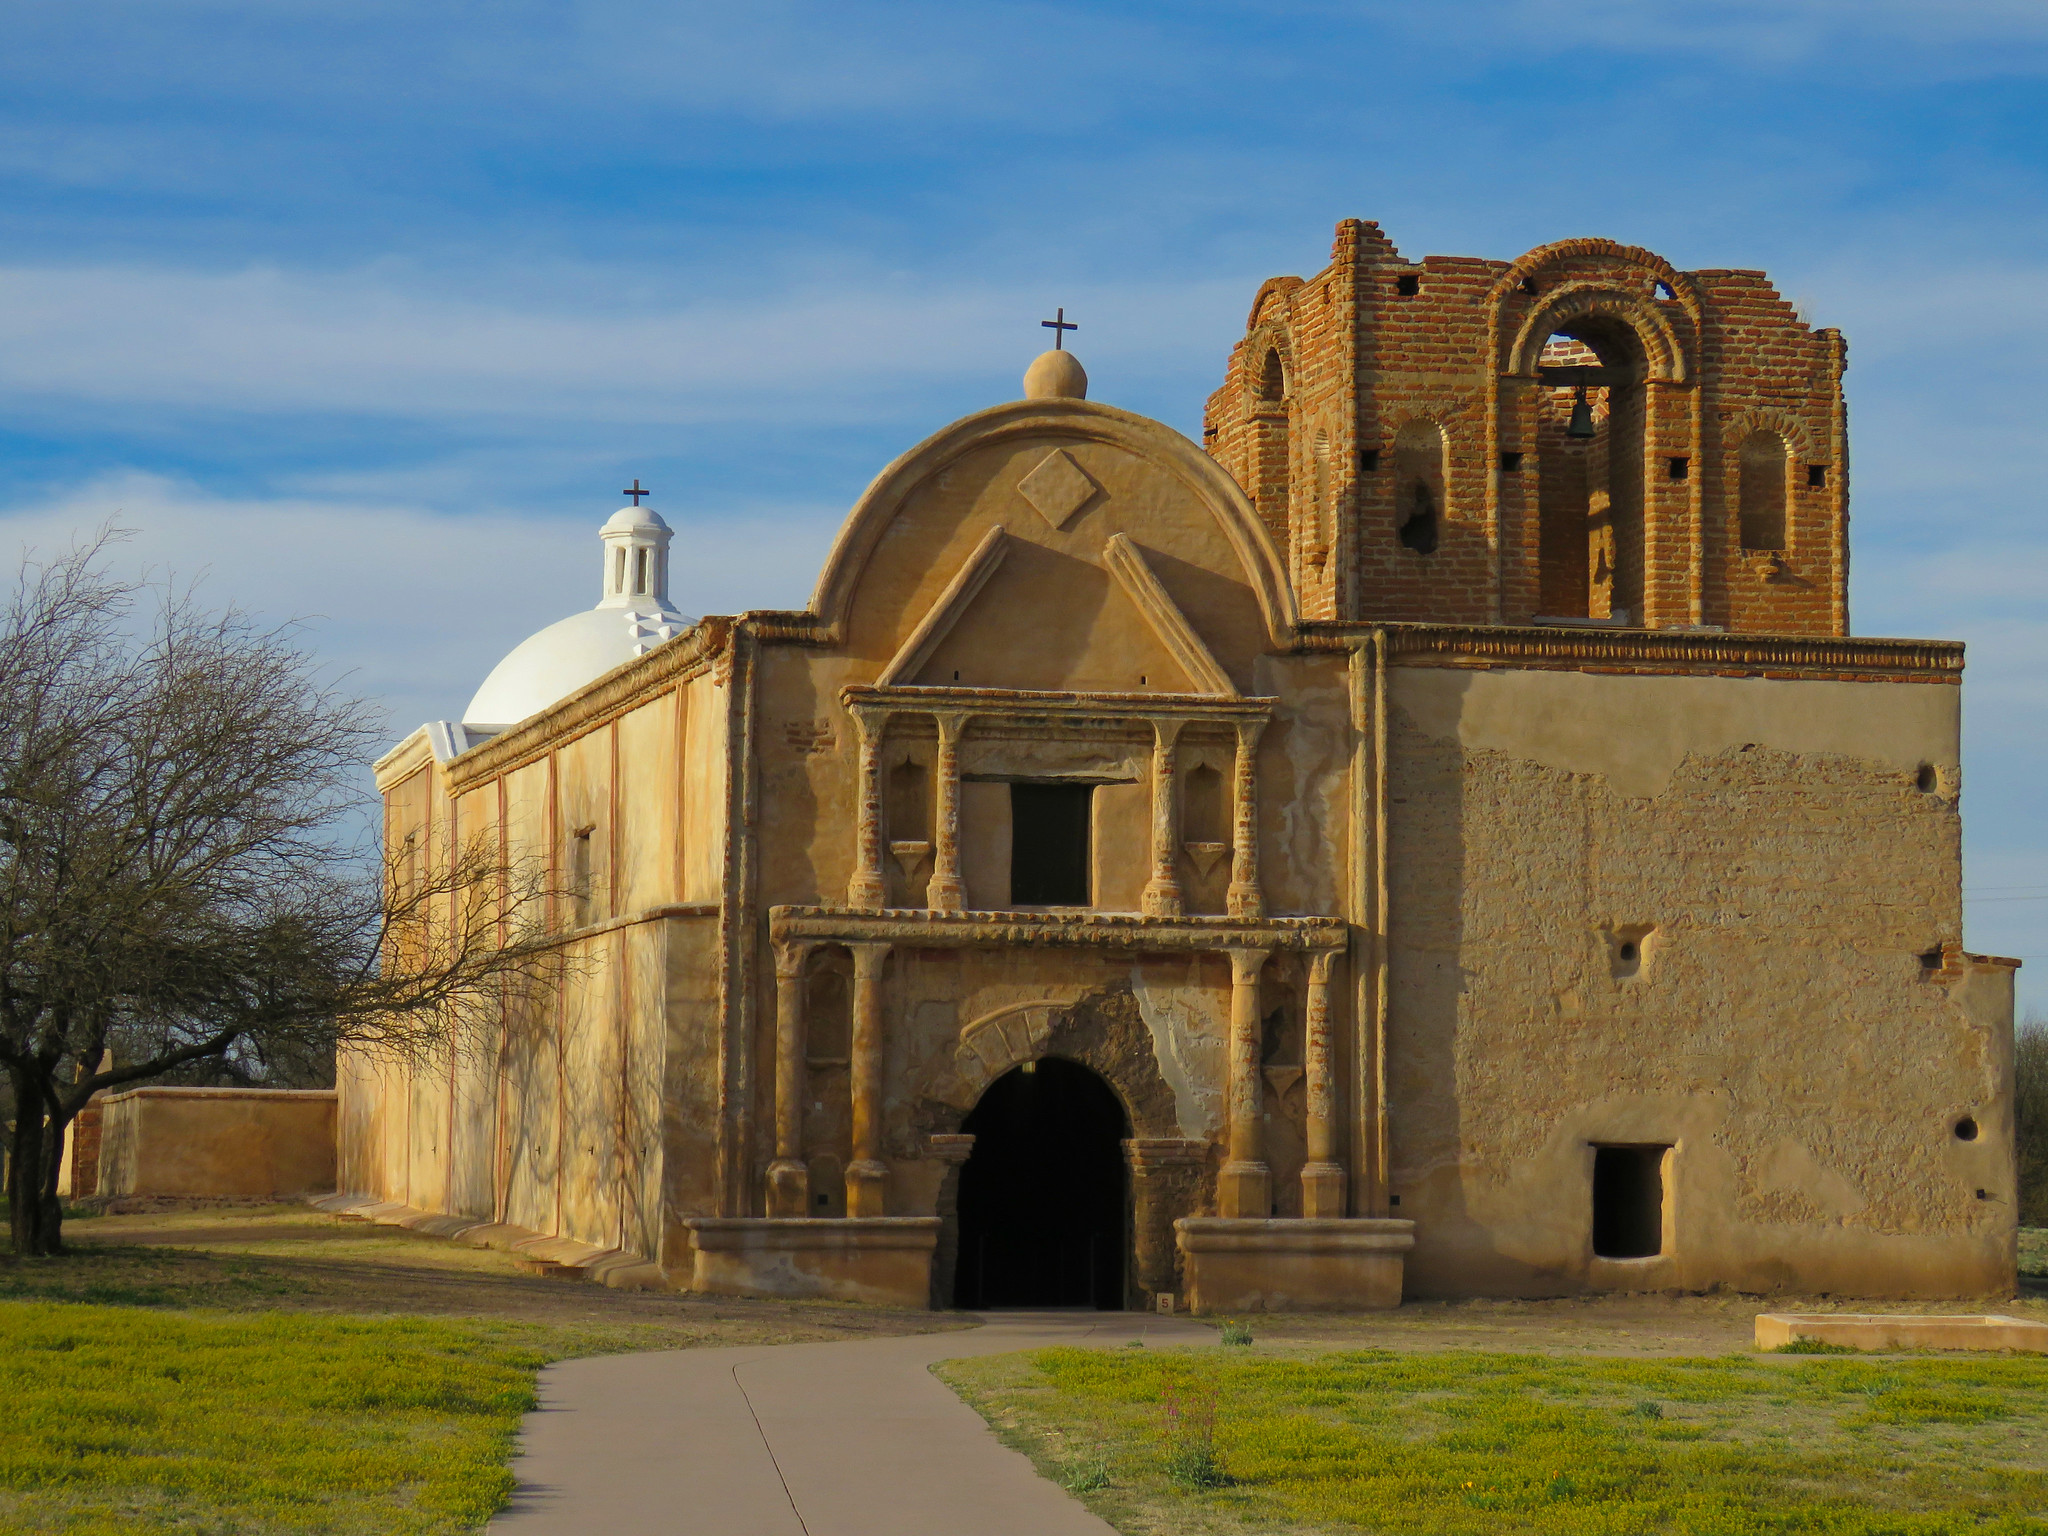 The Tumacácori National Historical Park is one of the national parks in Arizona still open during the coronavirus.